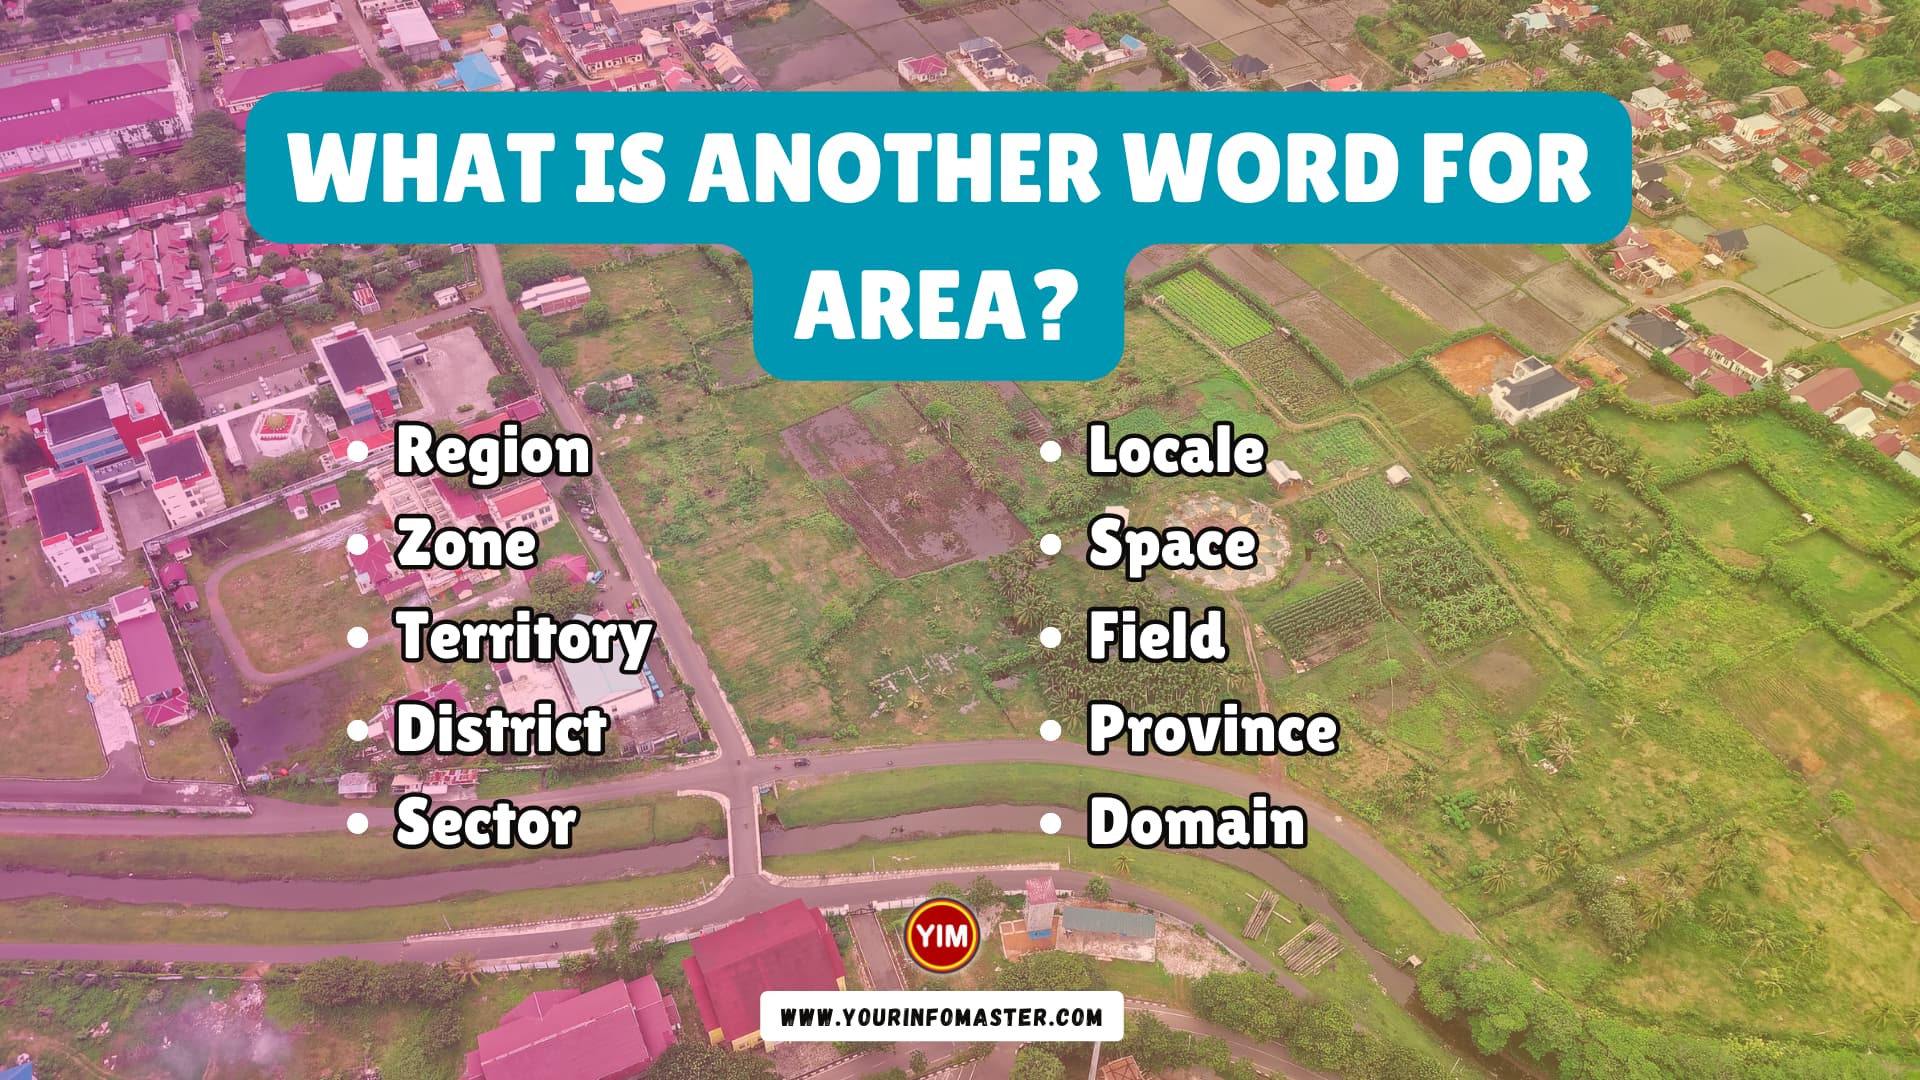 What is another word for Area